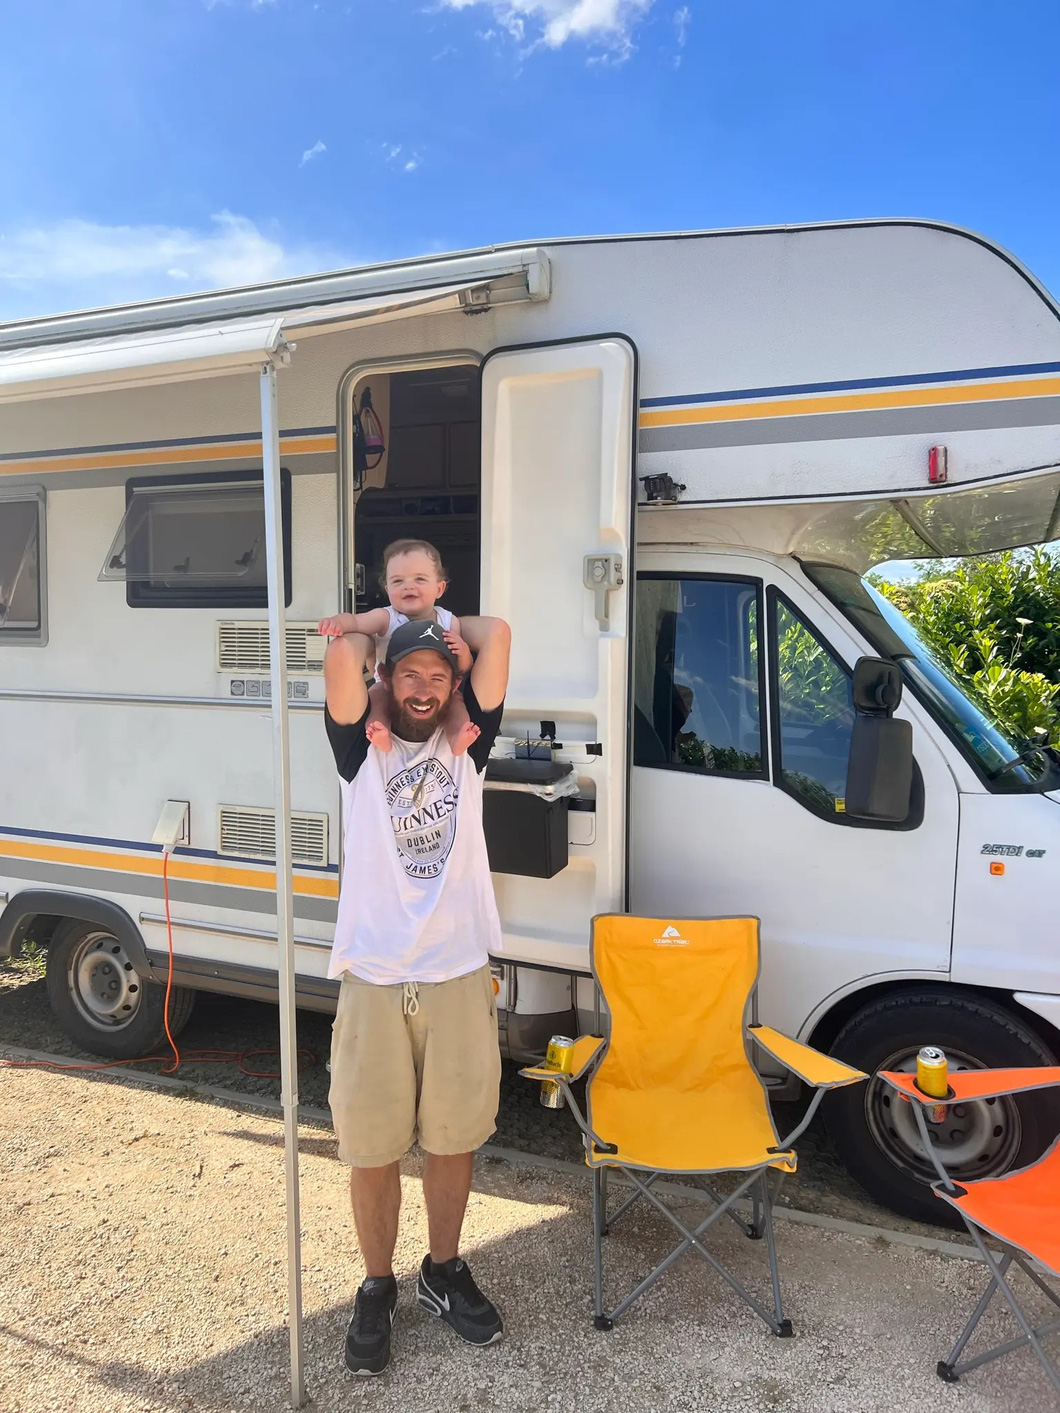 Before embarking on the trip, the couple saved money, sold most of their belongings, terminated their lease, and purchased a vehicle to use as a mobile home.  Lewis said his trailer has plenty of space, including a bathroom with a shower, 10 cabinets, a sink, a toilet and two desks.